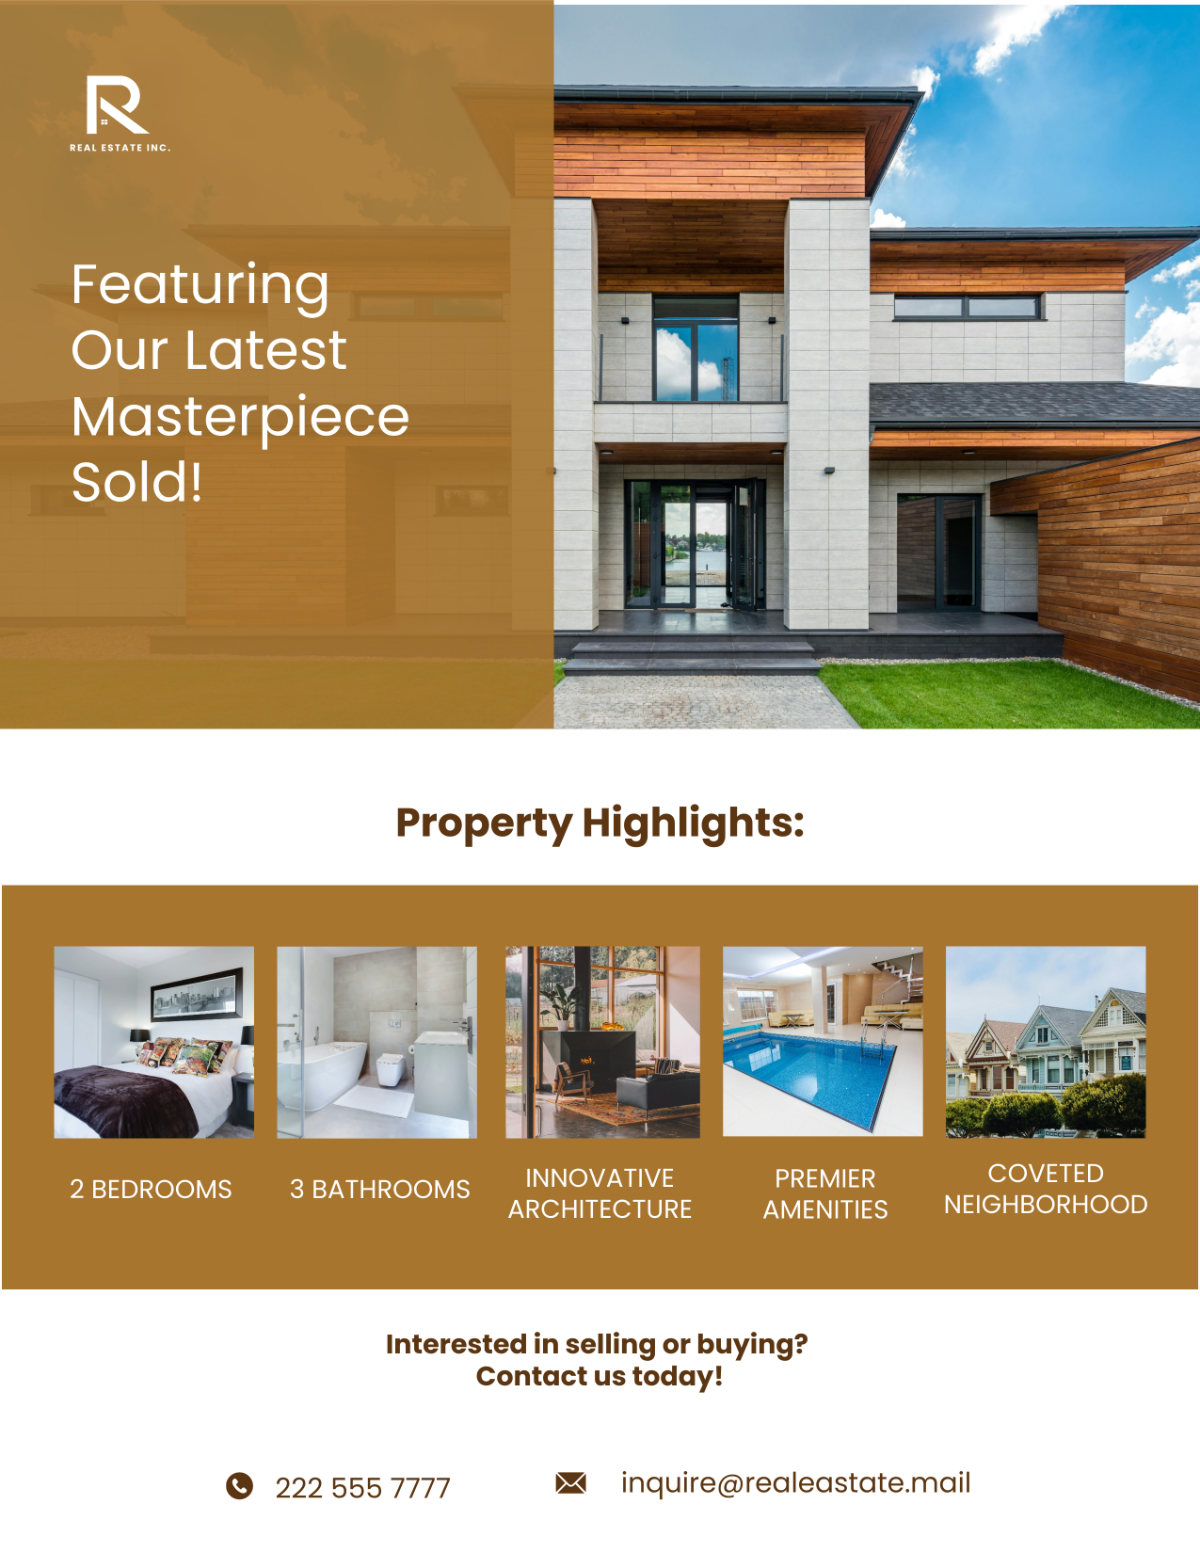 Free Recently Sold Property Showcase Flyer Template